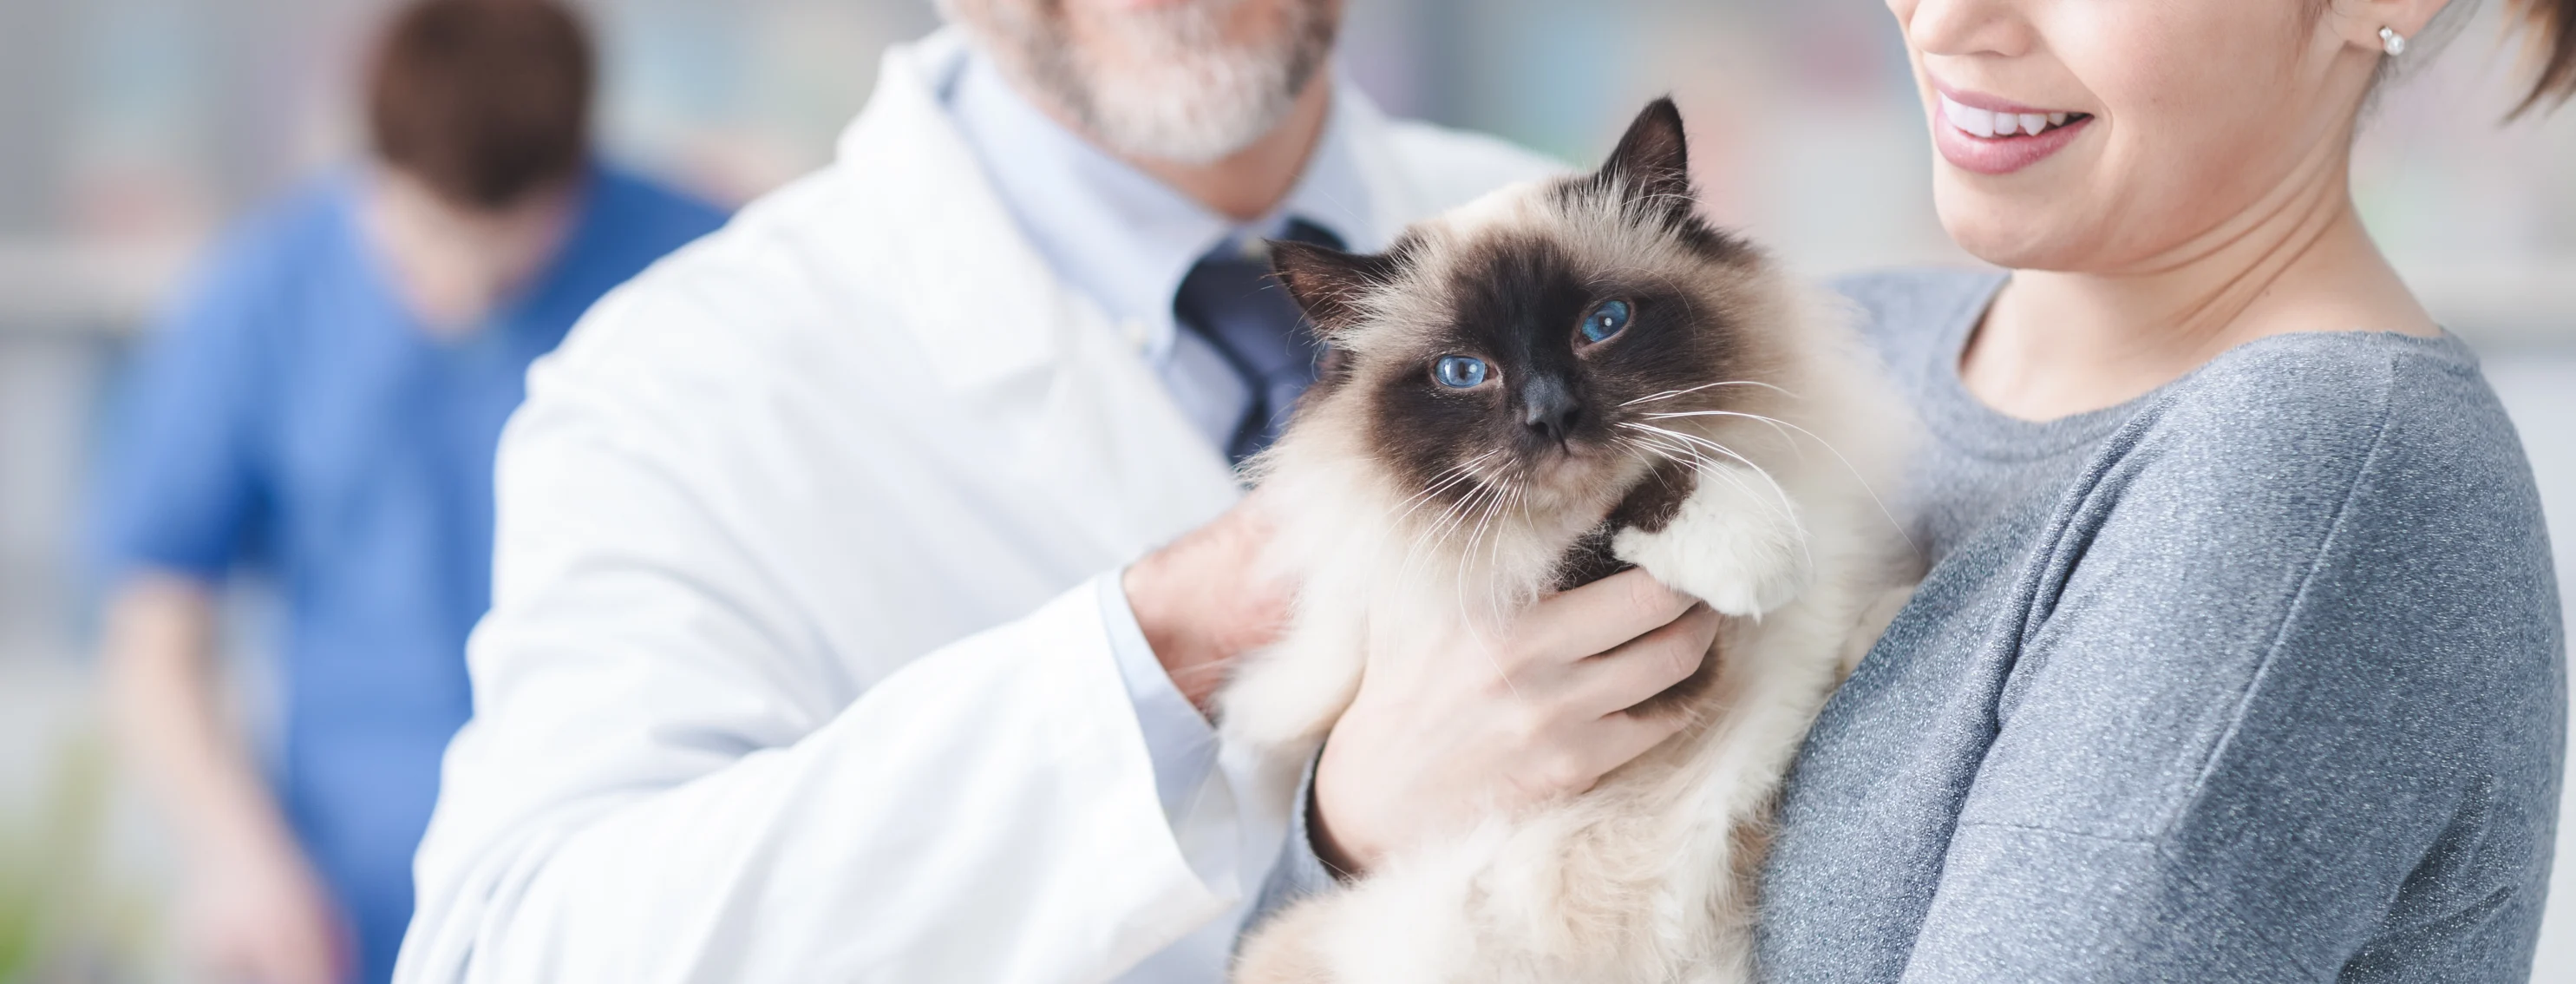 Woman holding cat with doctor